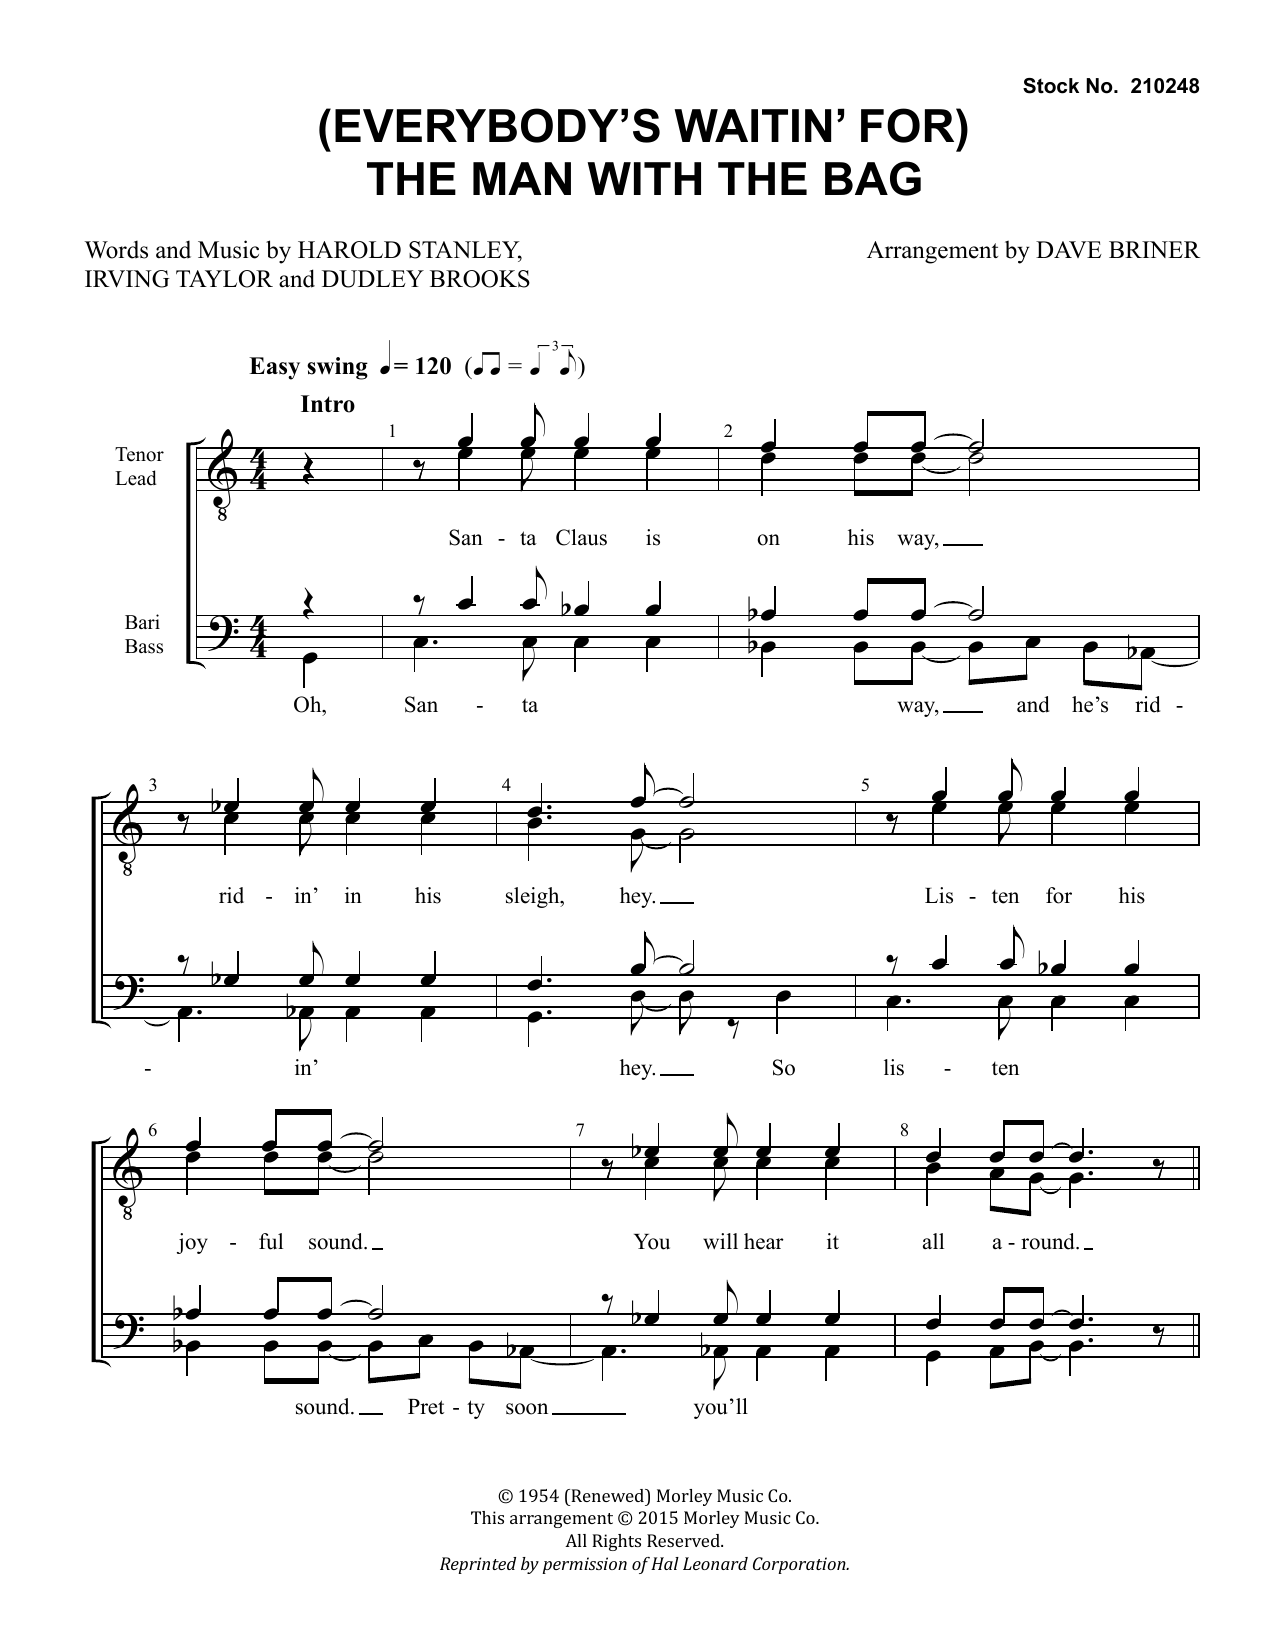 Download Kay Starr (Everybody's Waitin' for) The Man with Sheet Music